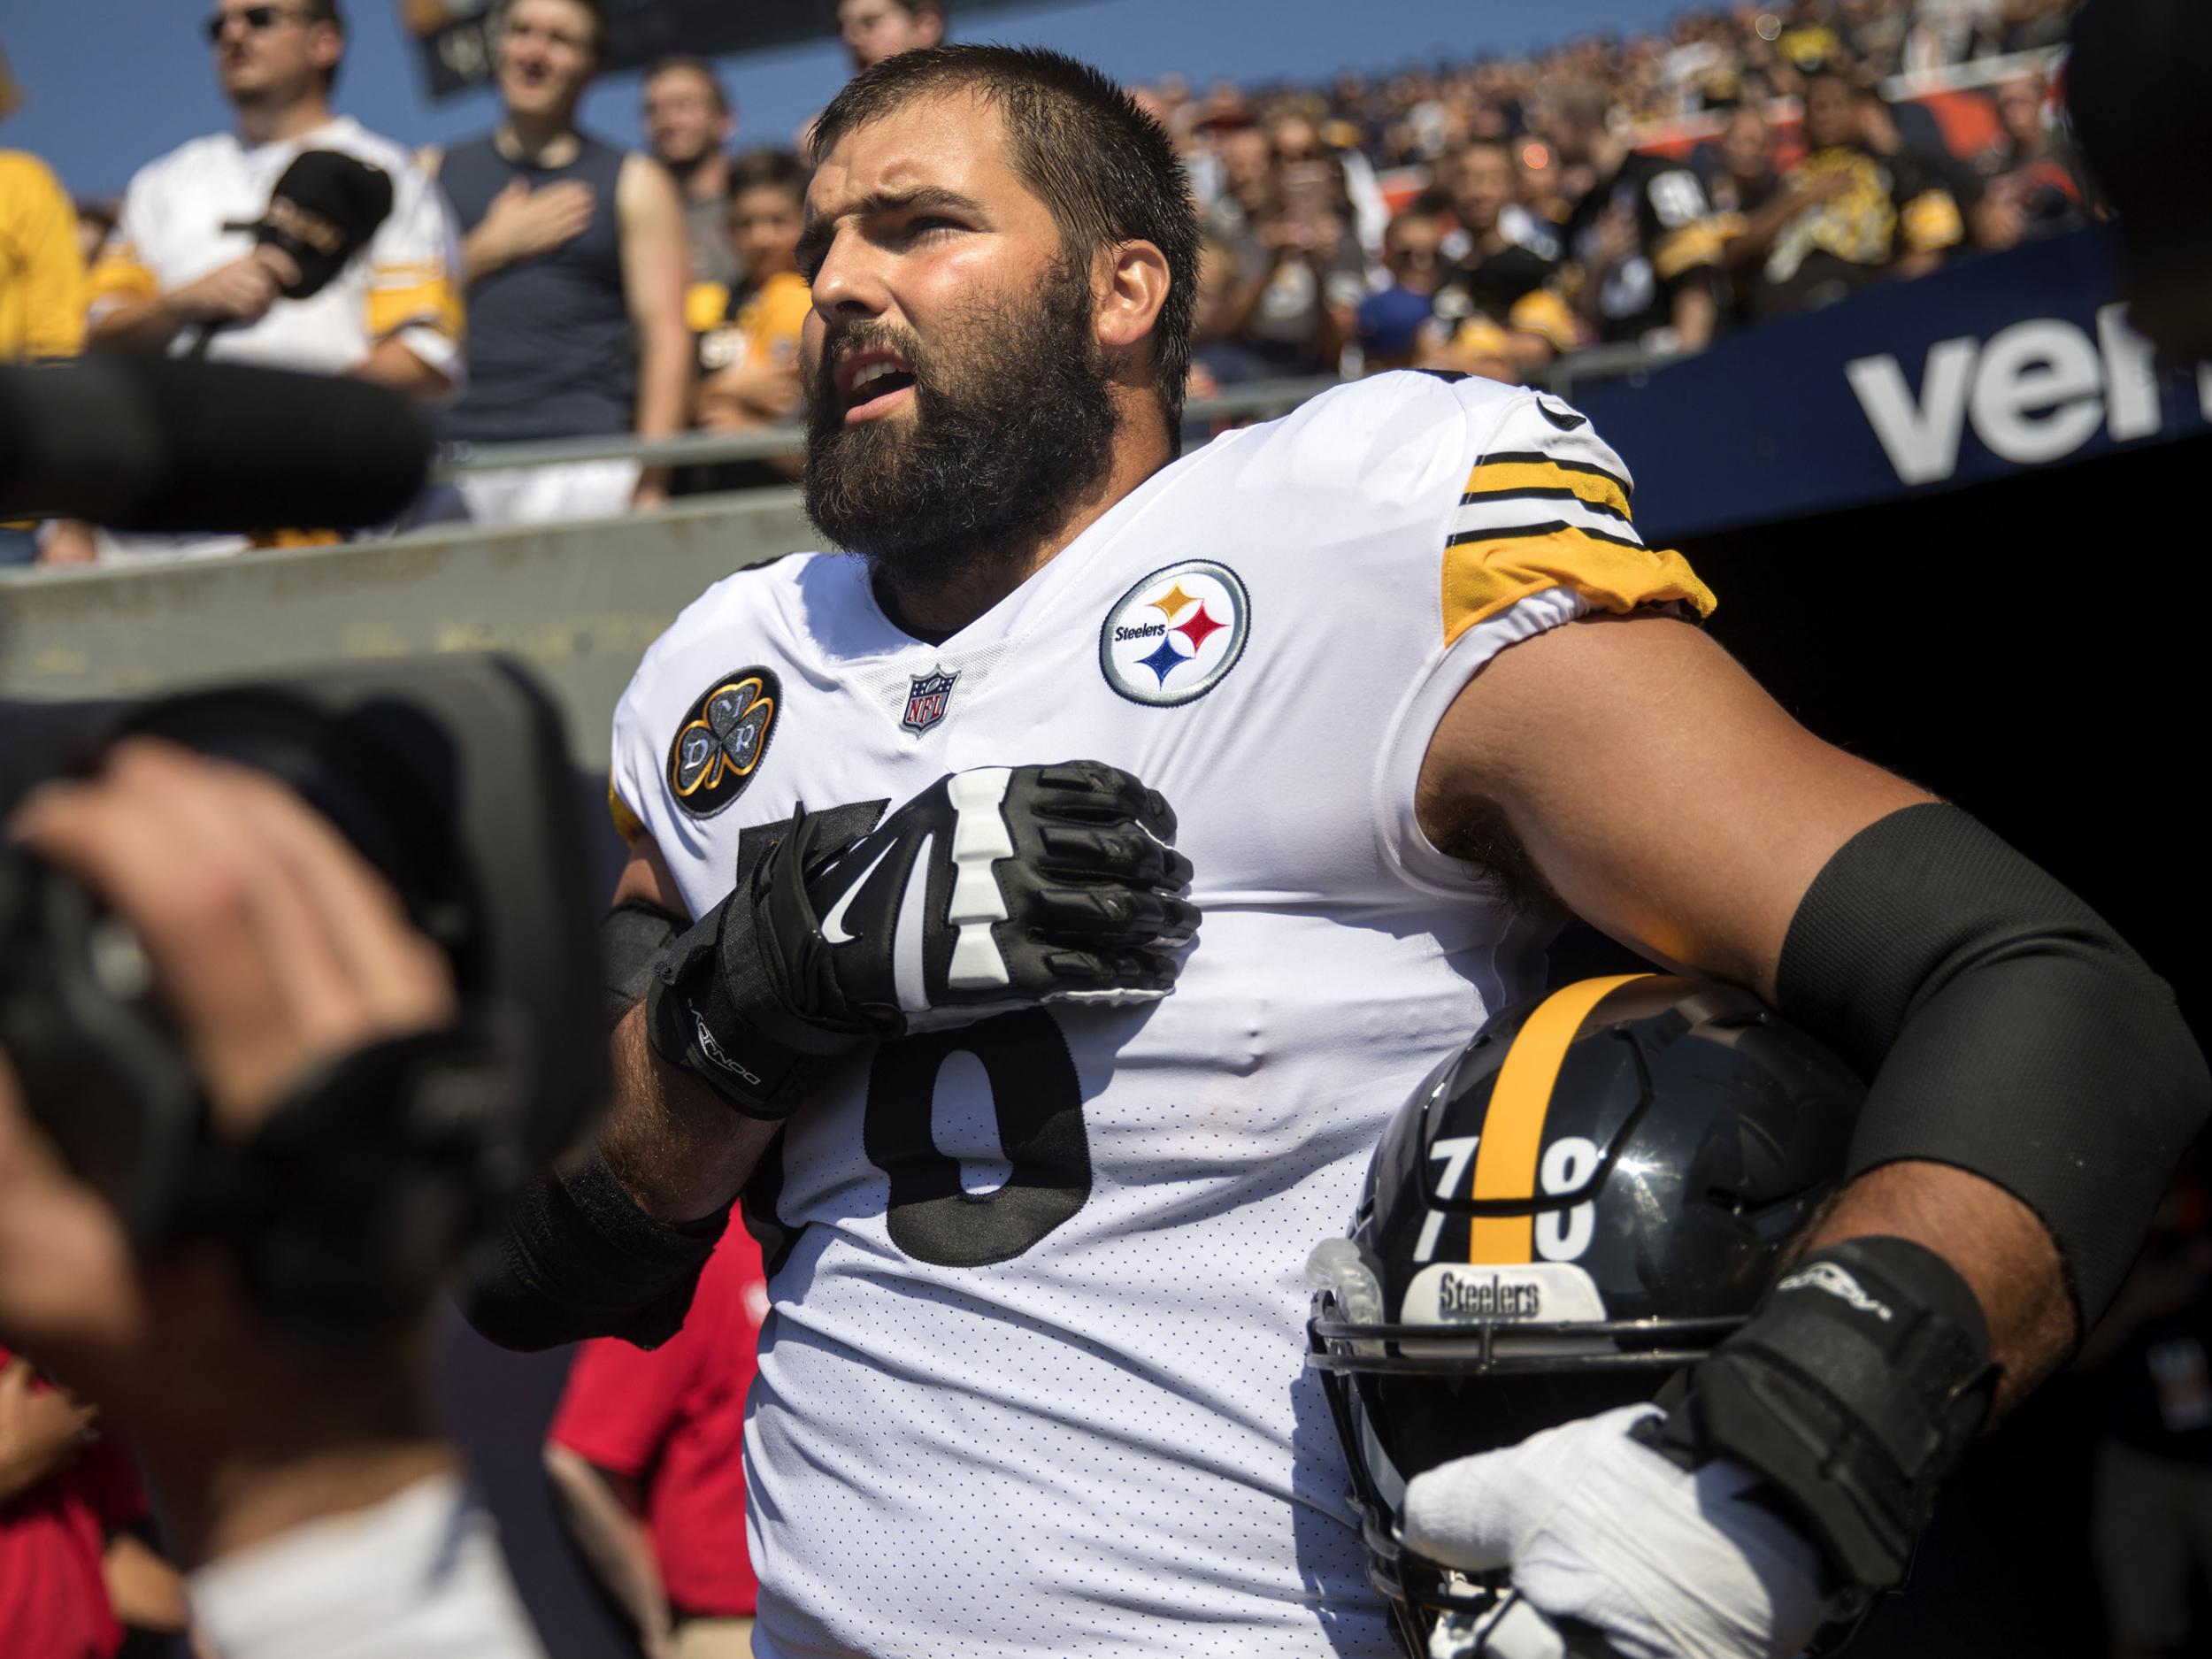 The situation is 'quite the opposite' of what everyone thinks, Villanueva explains